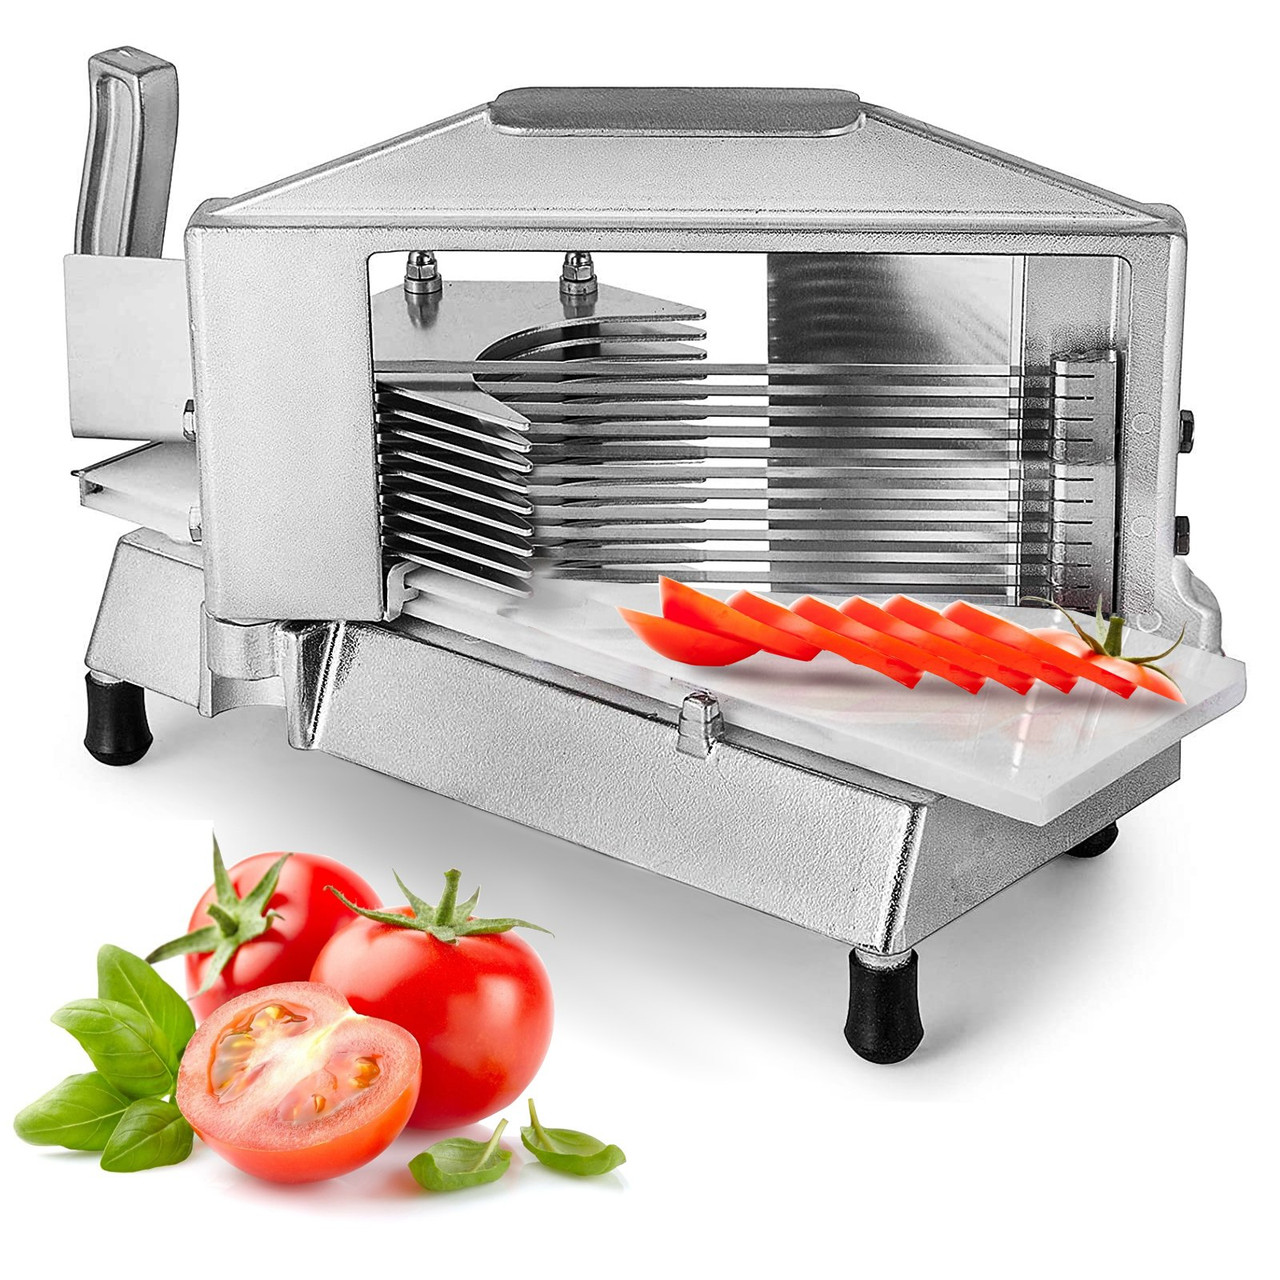 Commercial Tomato Slicer 1/4" Heavy Duty Cutter with Built-in Cutting Board for Restaurant or Home Use